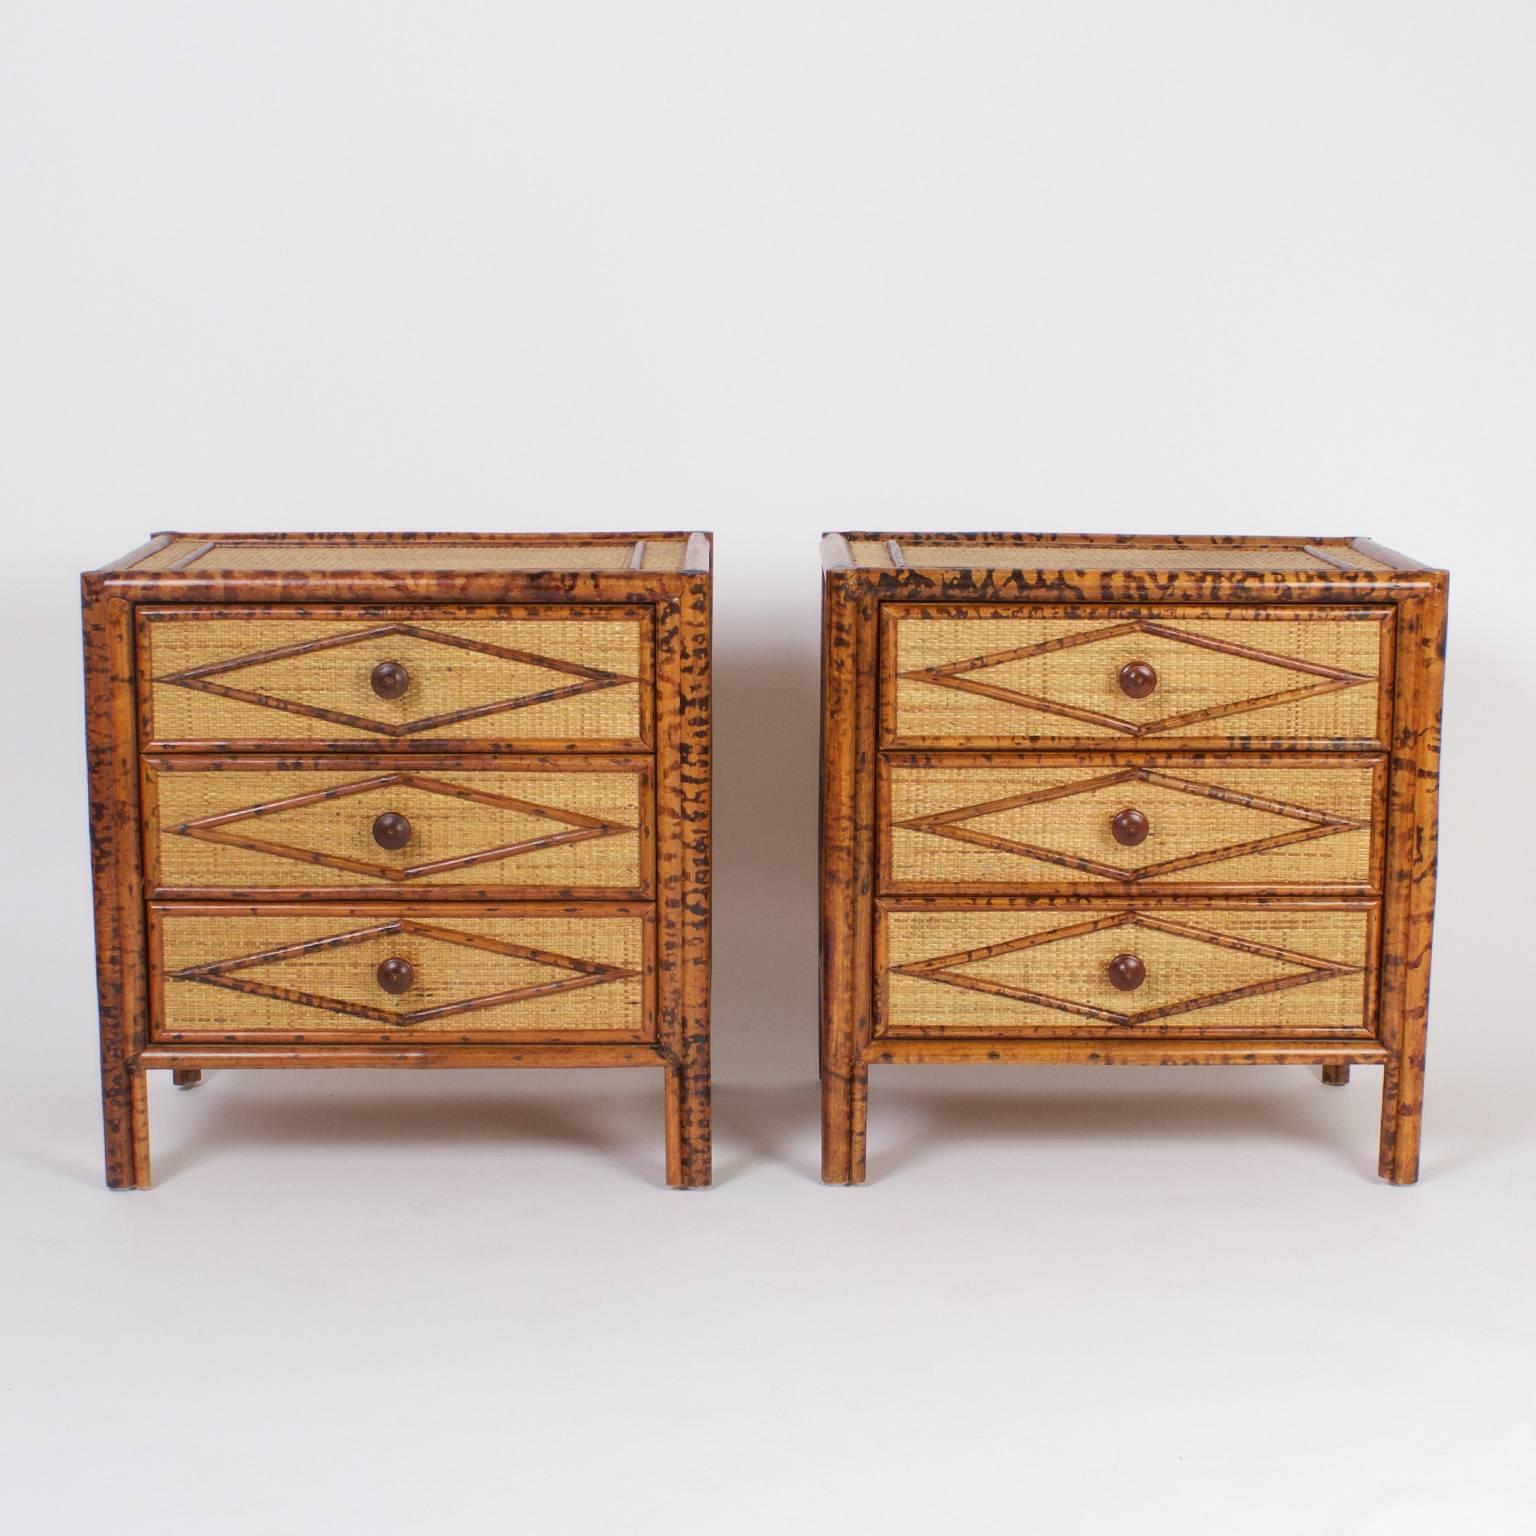 Pair of three drawer rattan nightstands or chests with a lush tropical ambiance that is modern yet warm. The case is covered with grass cloth and the frame is hand painted tortoiseshell faux bamboo. The sides and drawers have applied geometric